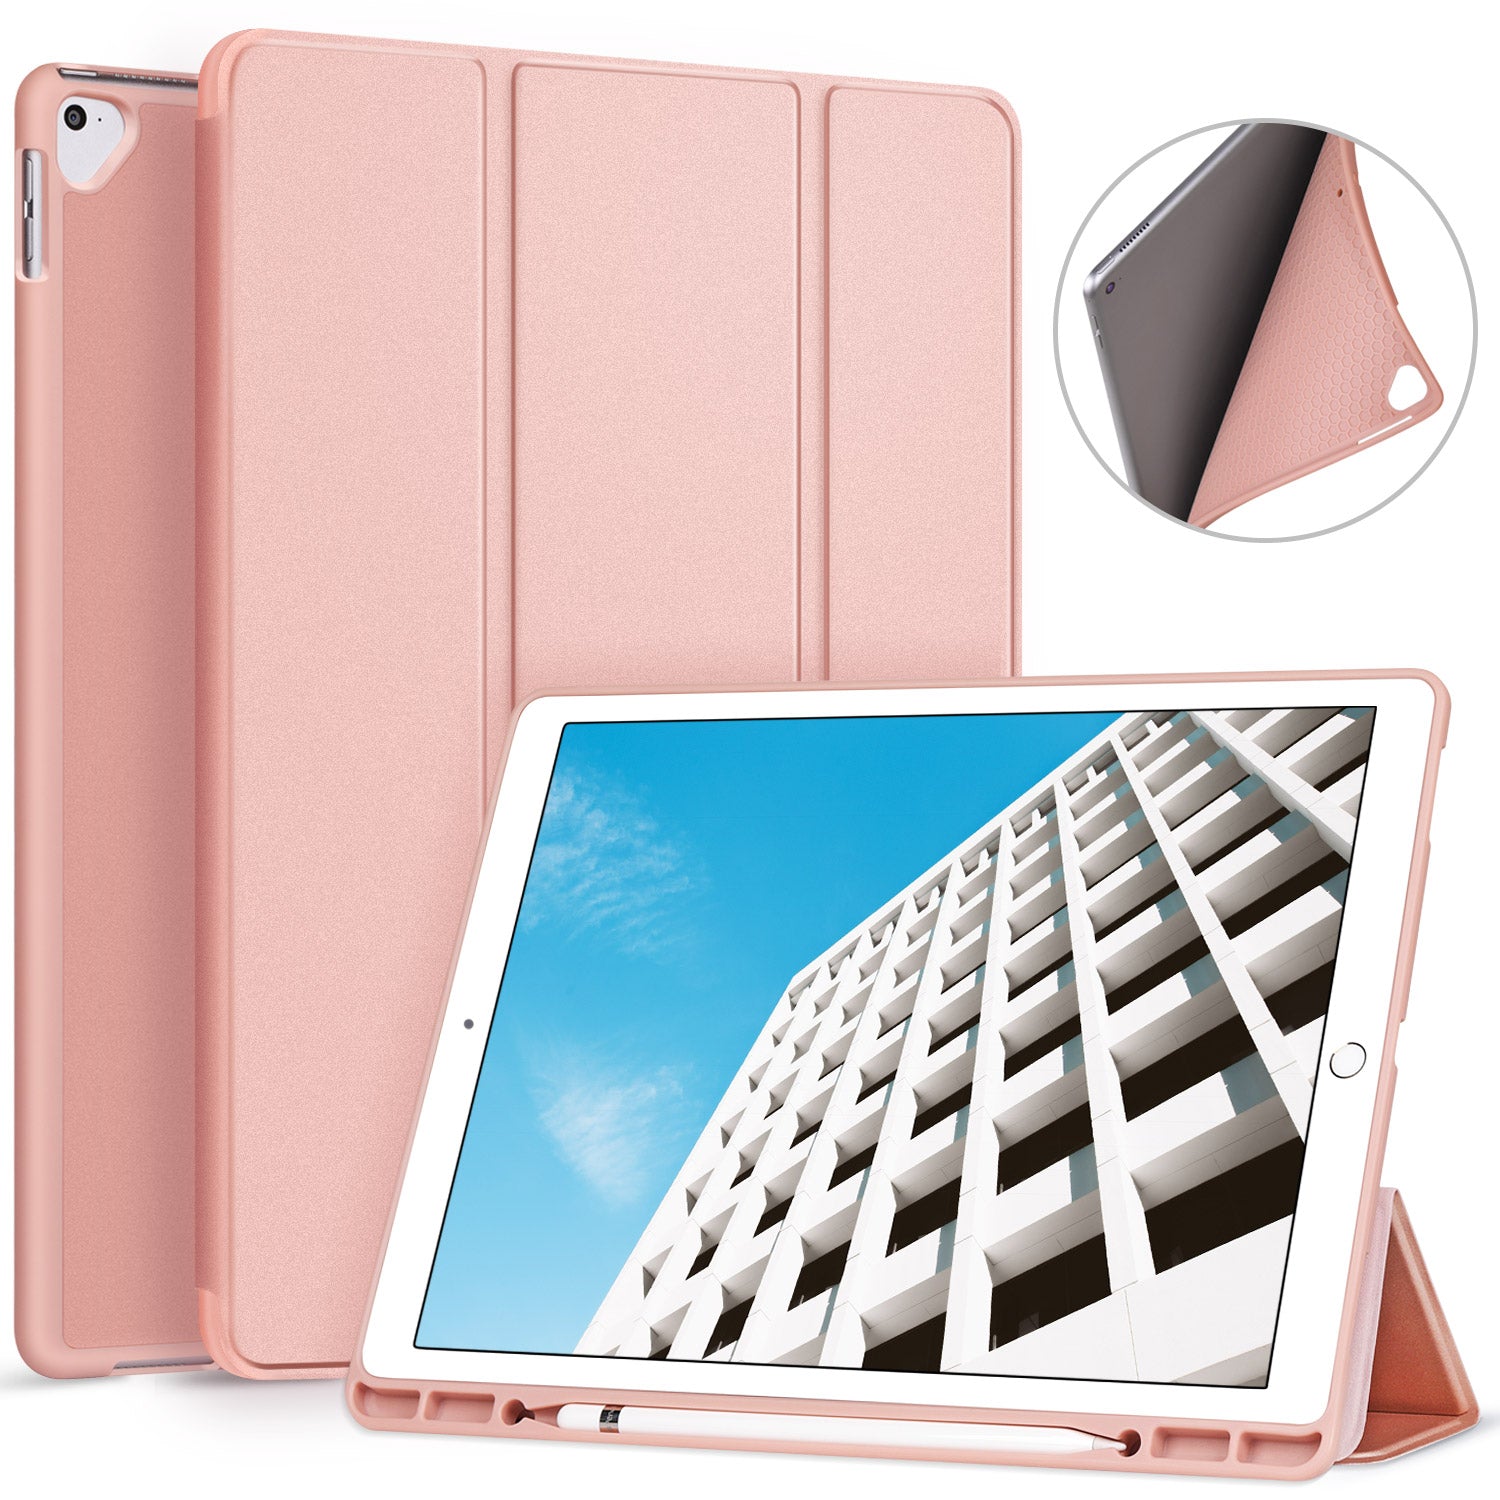 iPad Pro 12.9 2017/2015 Case with Pencil Holder